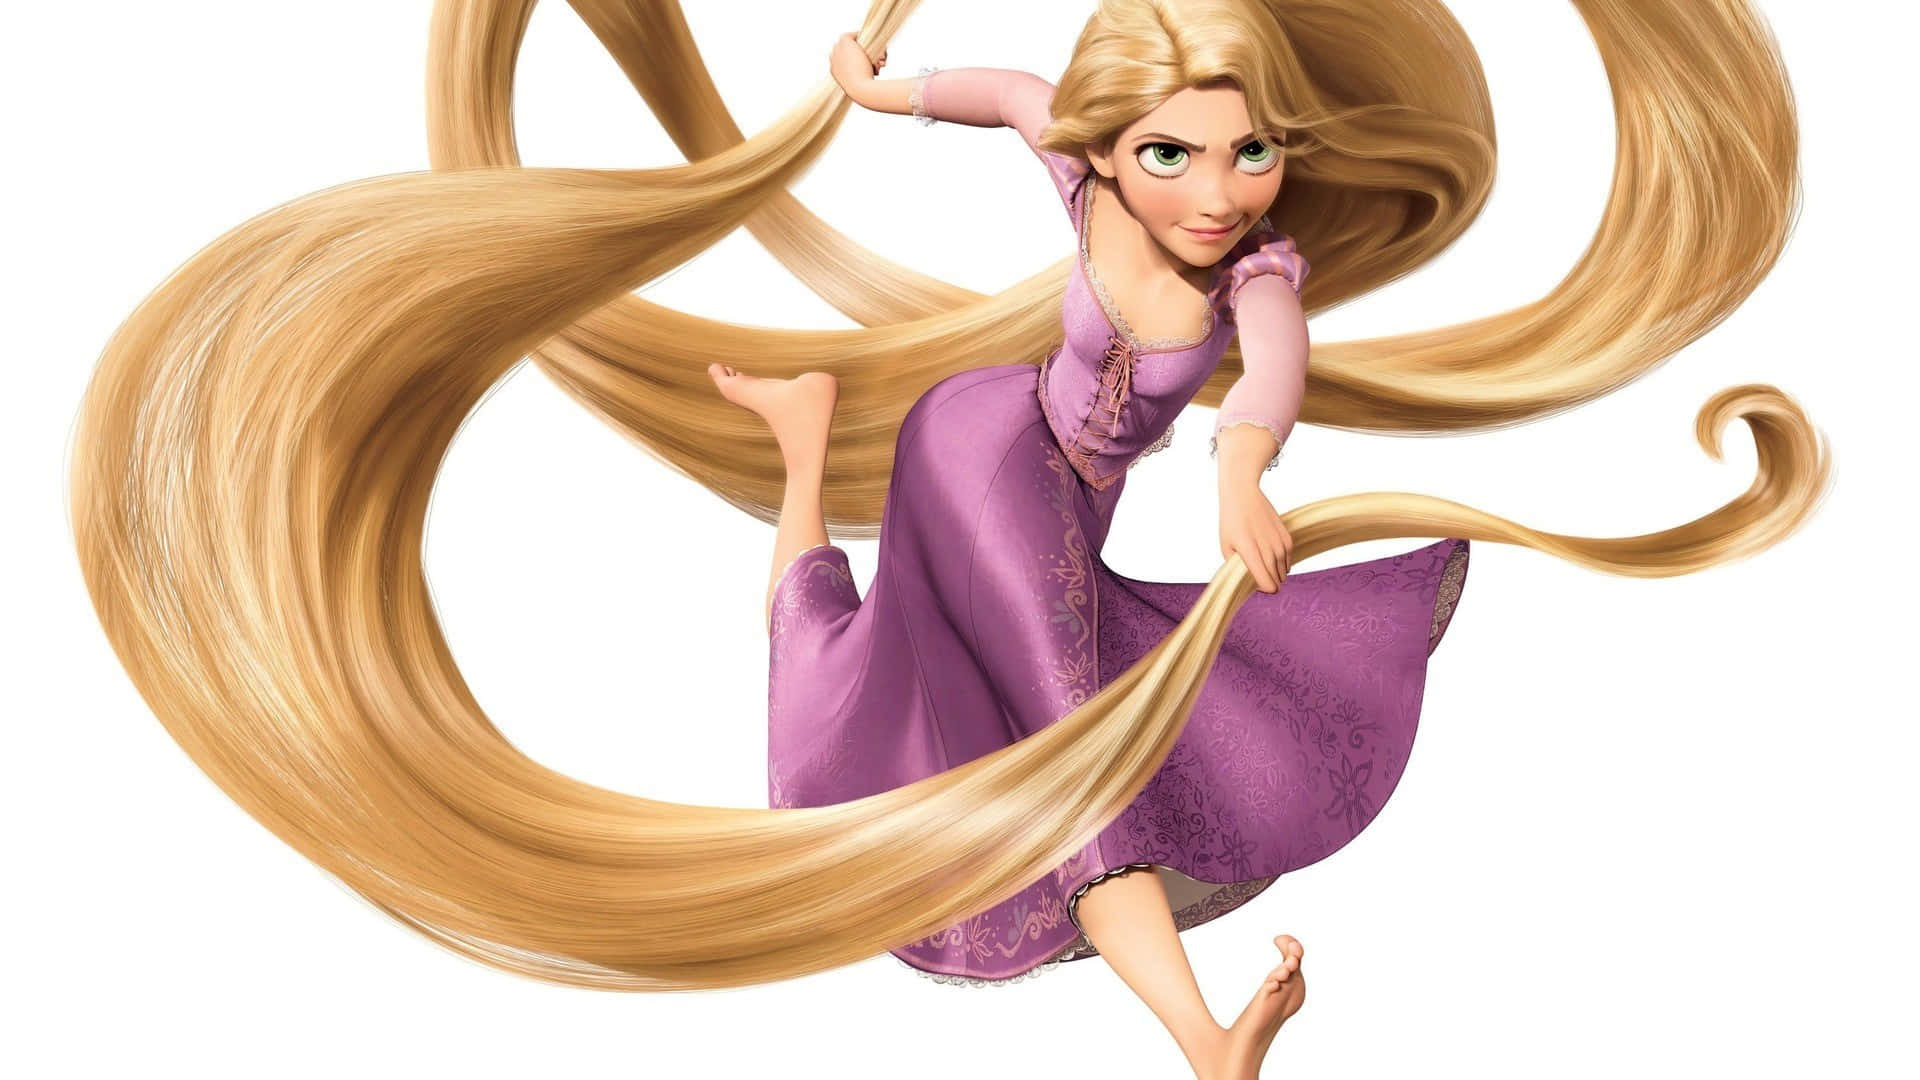 Let your hair down and watch the world with Rapunzel in Tangled